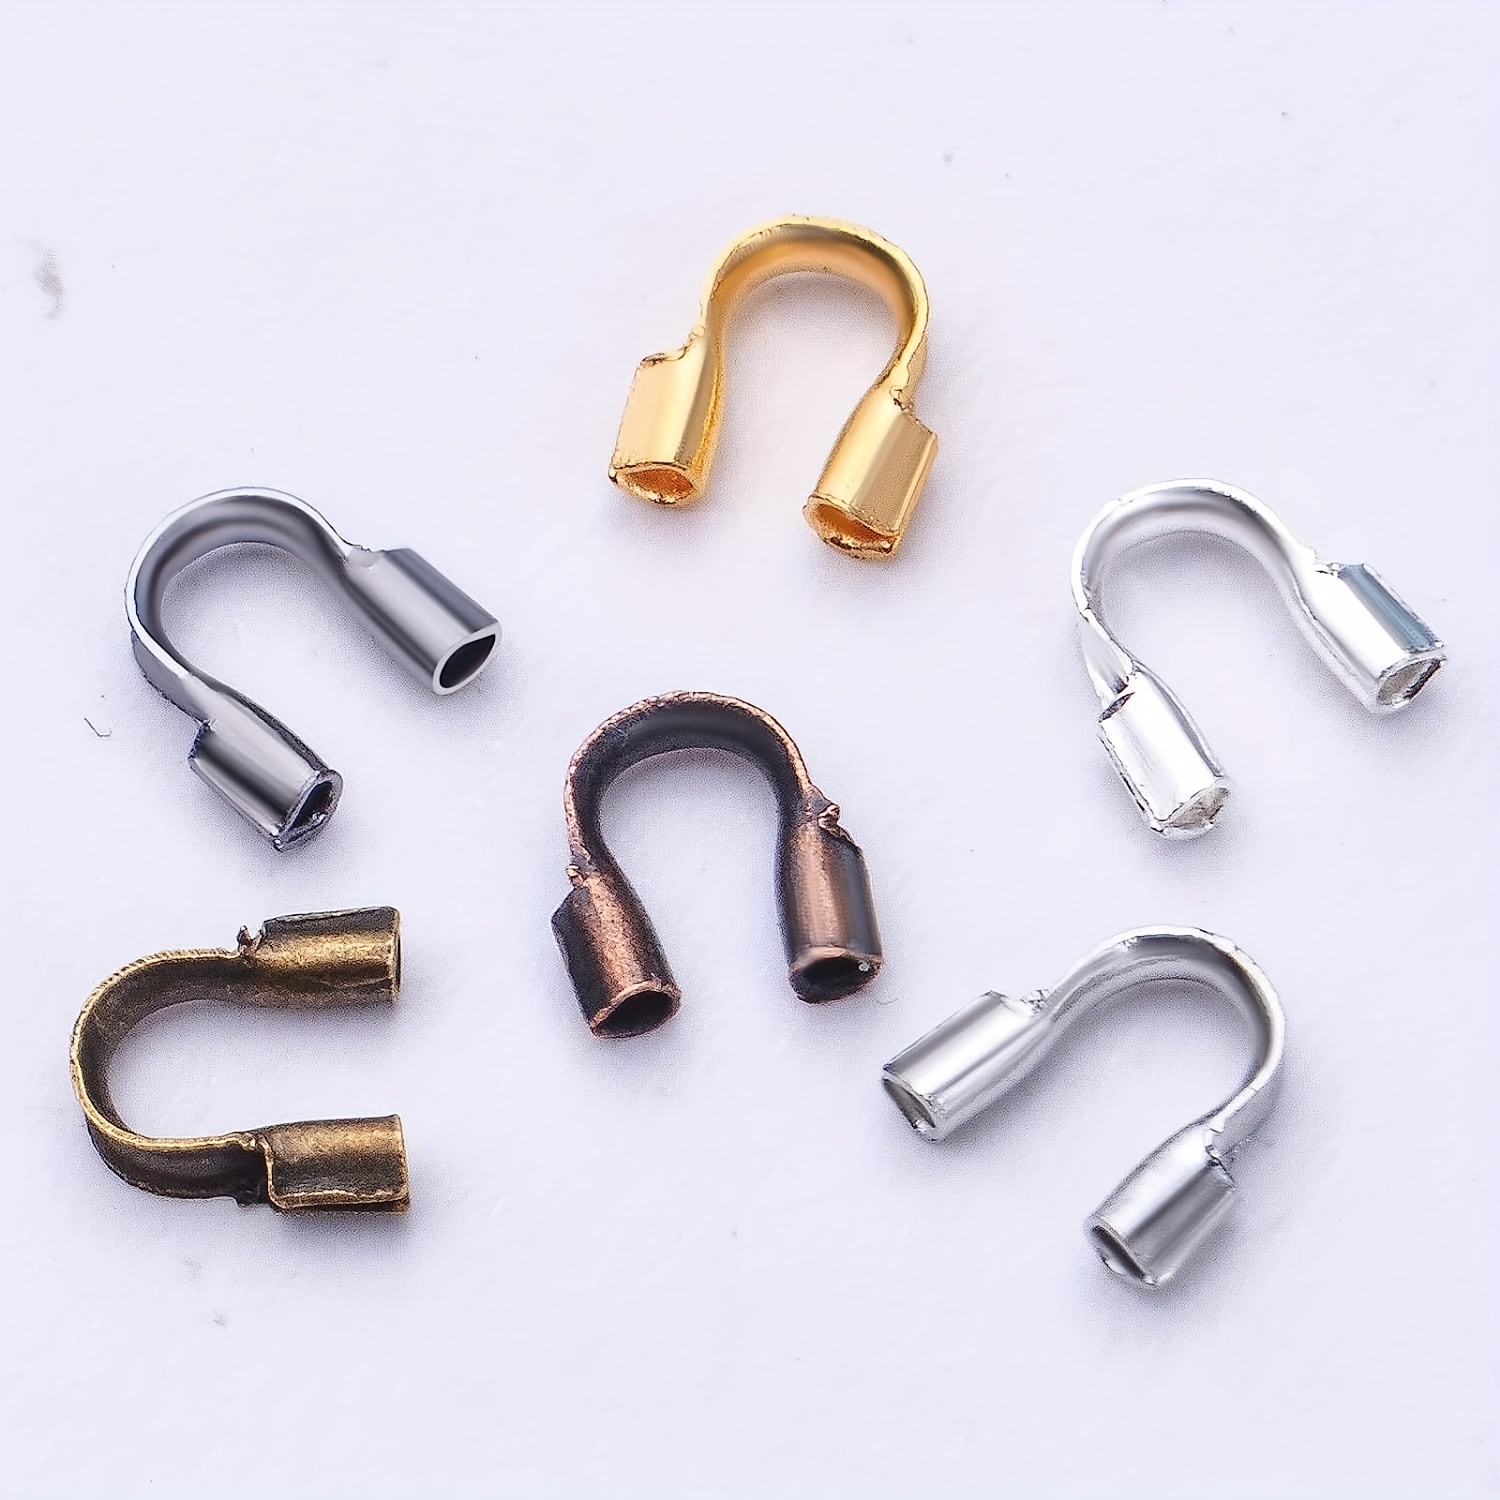 Wire Protectors Wire Guard Guardian Protectors loops U Shape Accessories  Clasps Connector For Jewelry Making 100pcs/